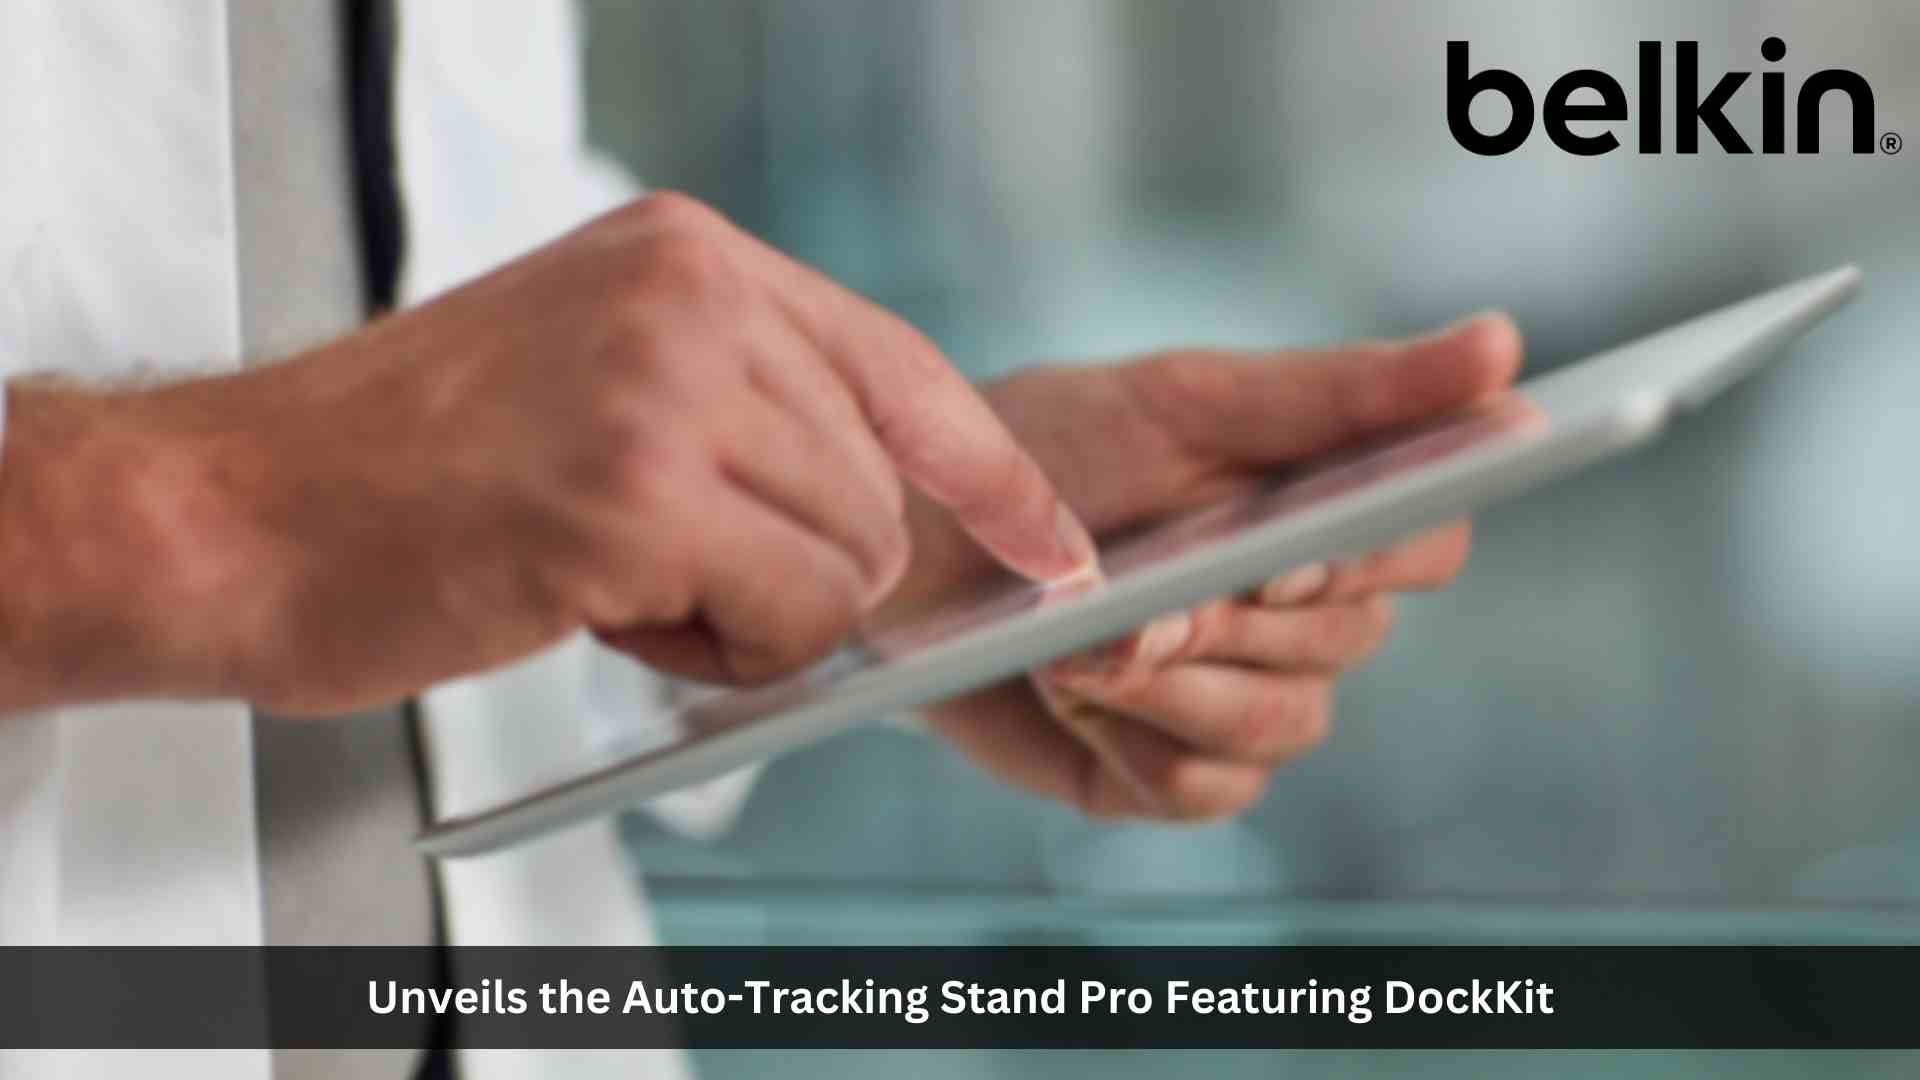 Belkin Unveils the Auto-Tracking Stand Pro Featuring DockKit, Taking Content Creation to the Next Level